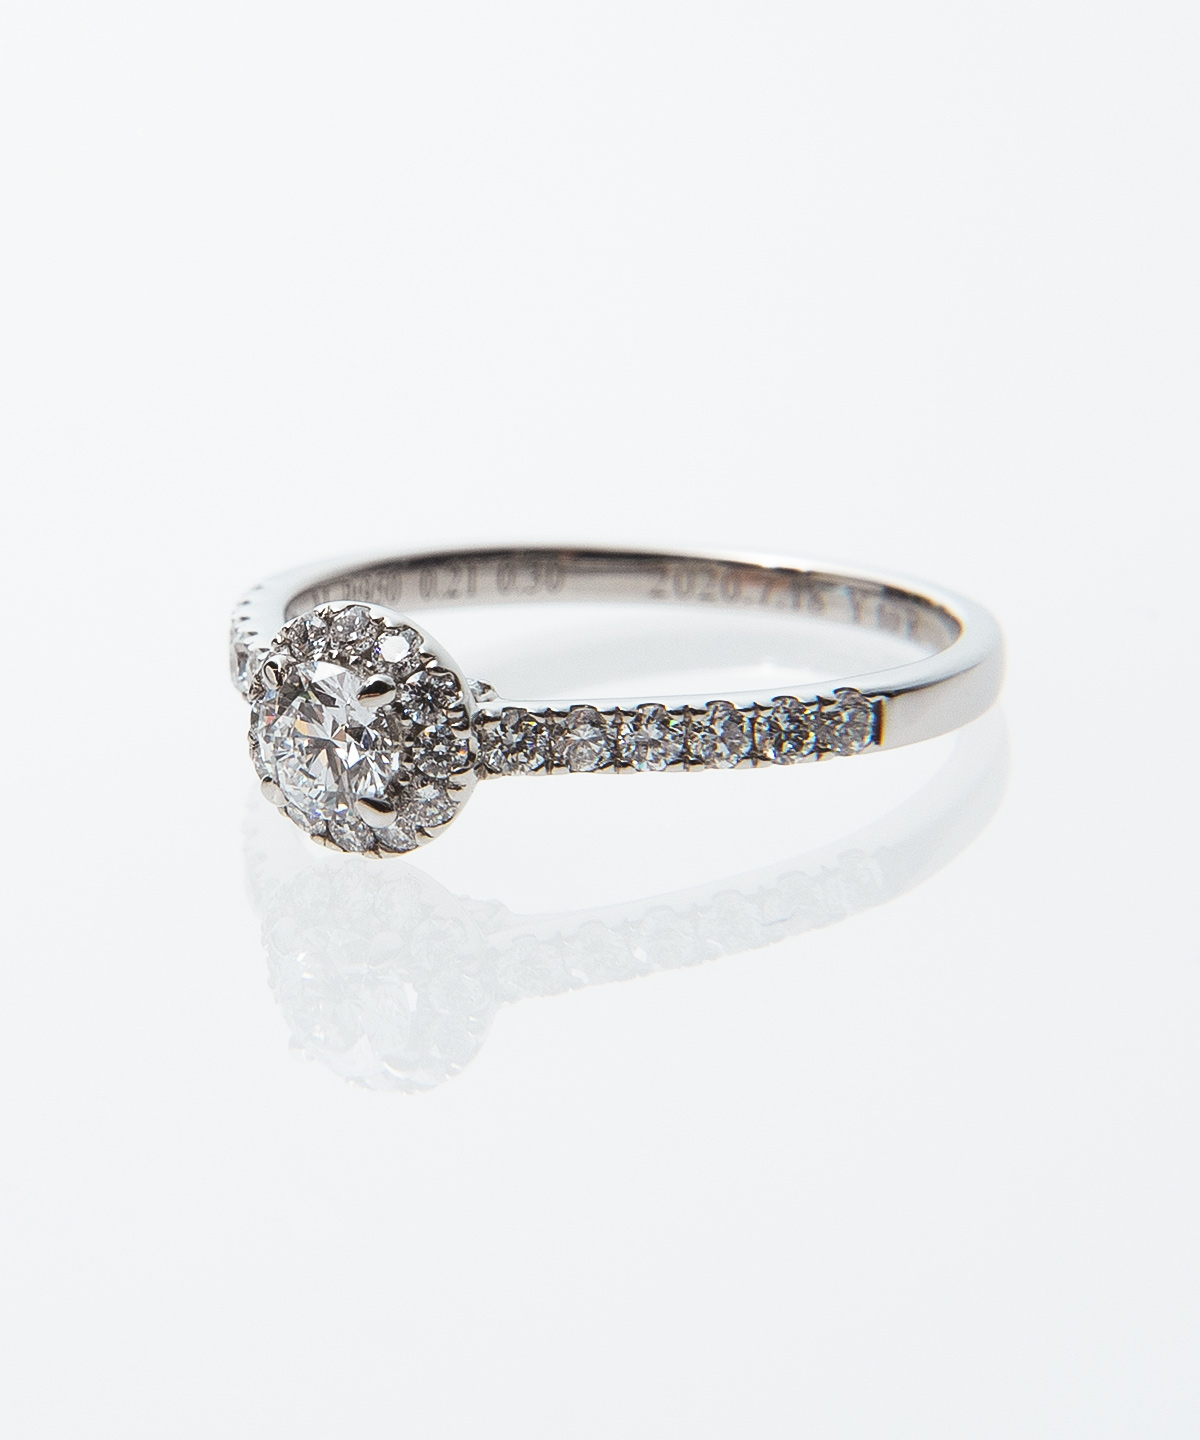 Bridal〉Magnolia Round Pave Ring | collective【公式】オンライン